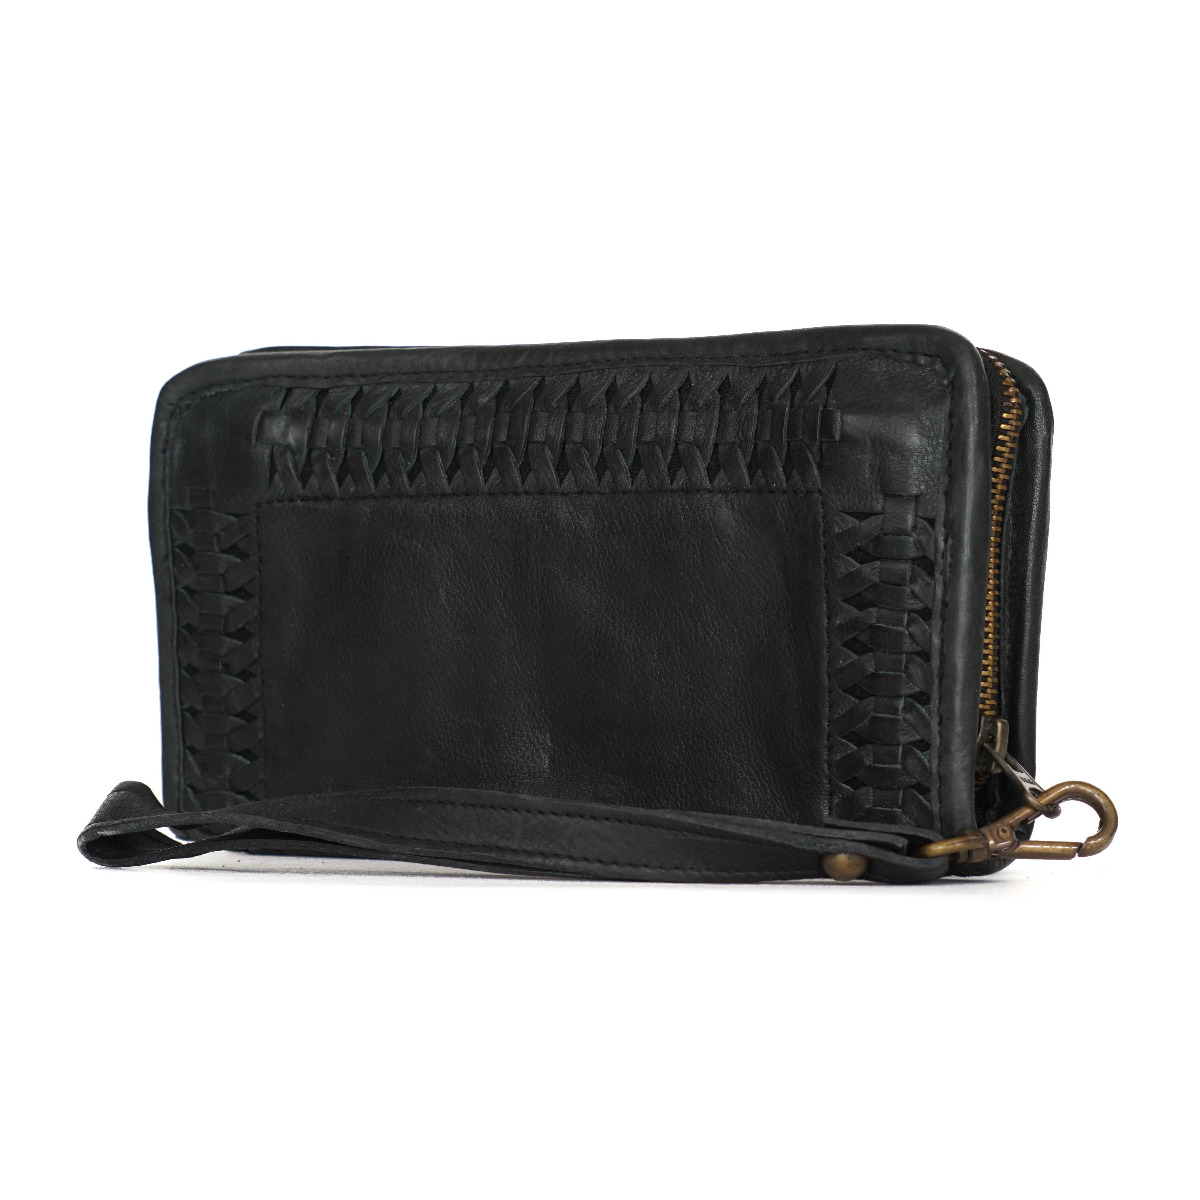 Black washed leather women zippered wallet